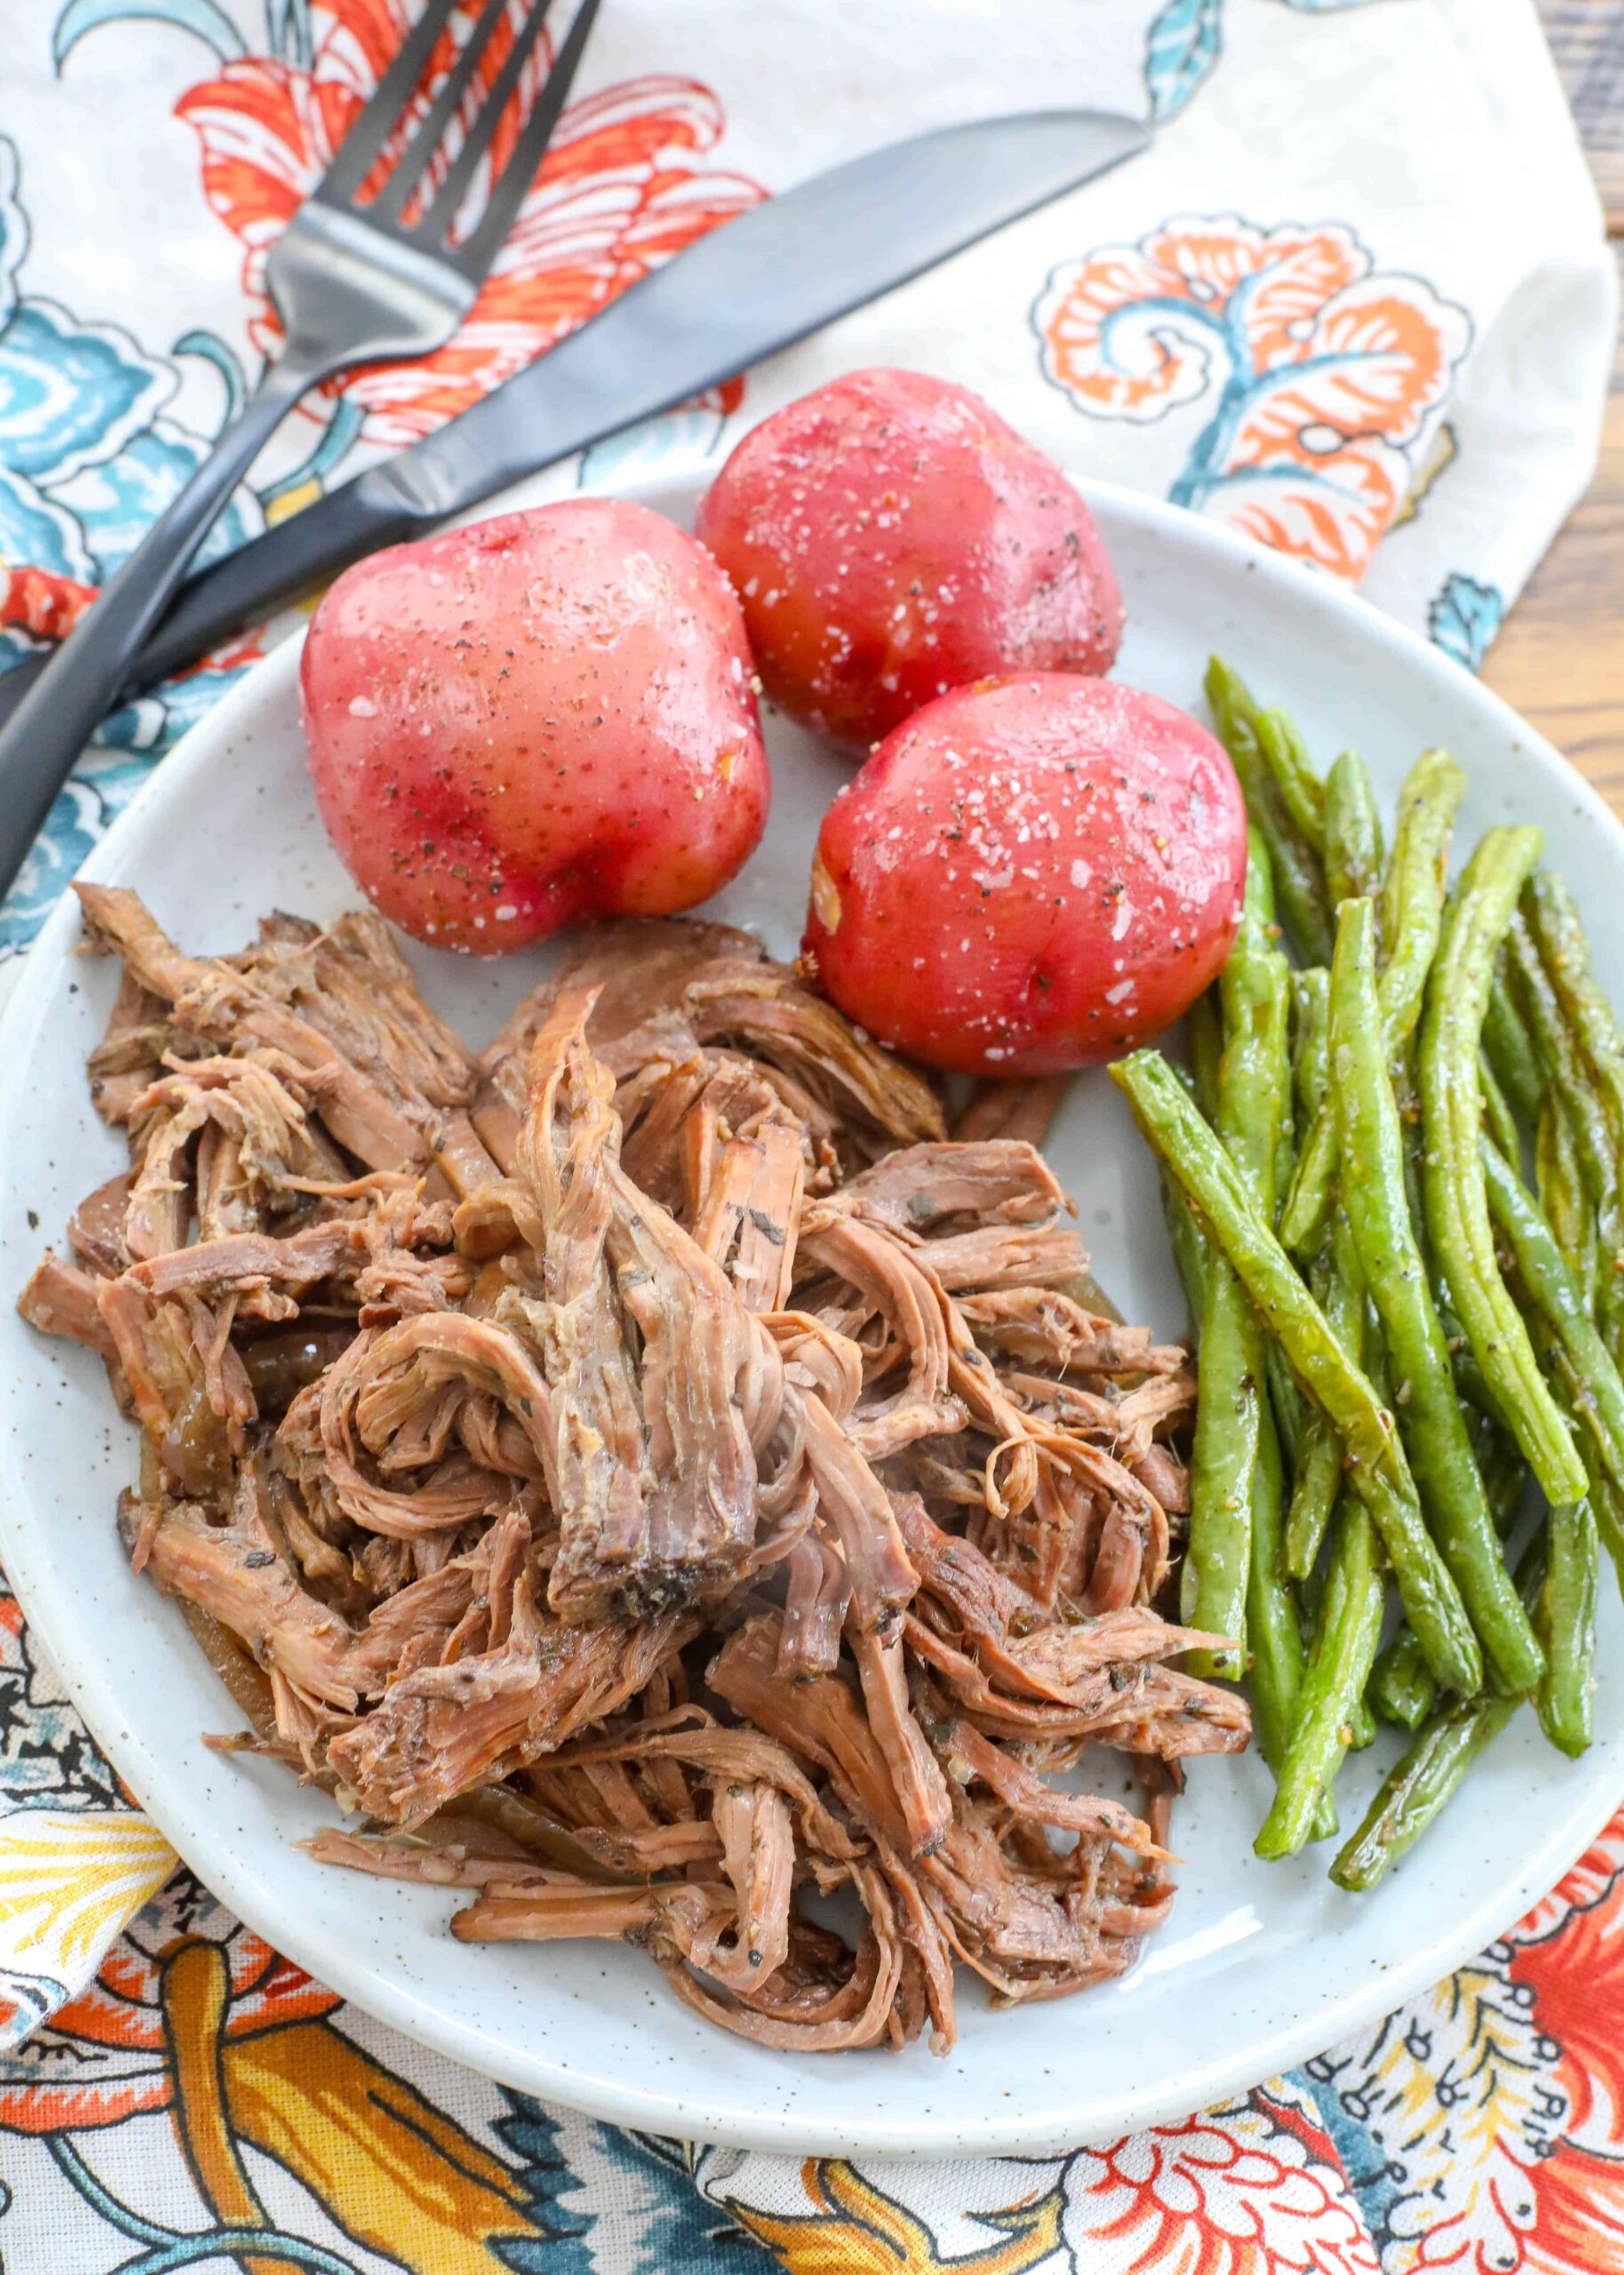  This recipe is perfect for a lazy Sunday, as you let the slow cooker do all the work.